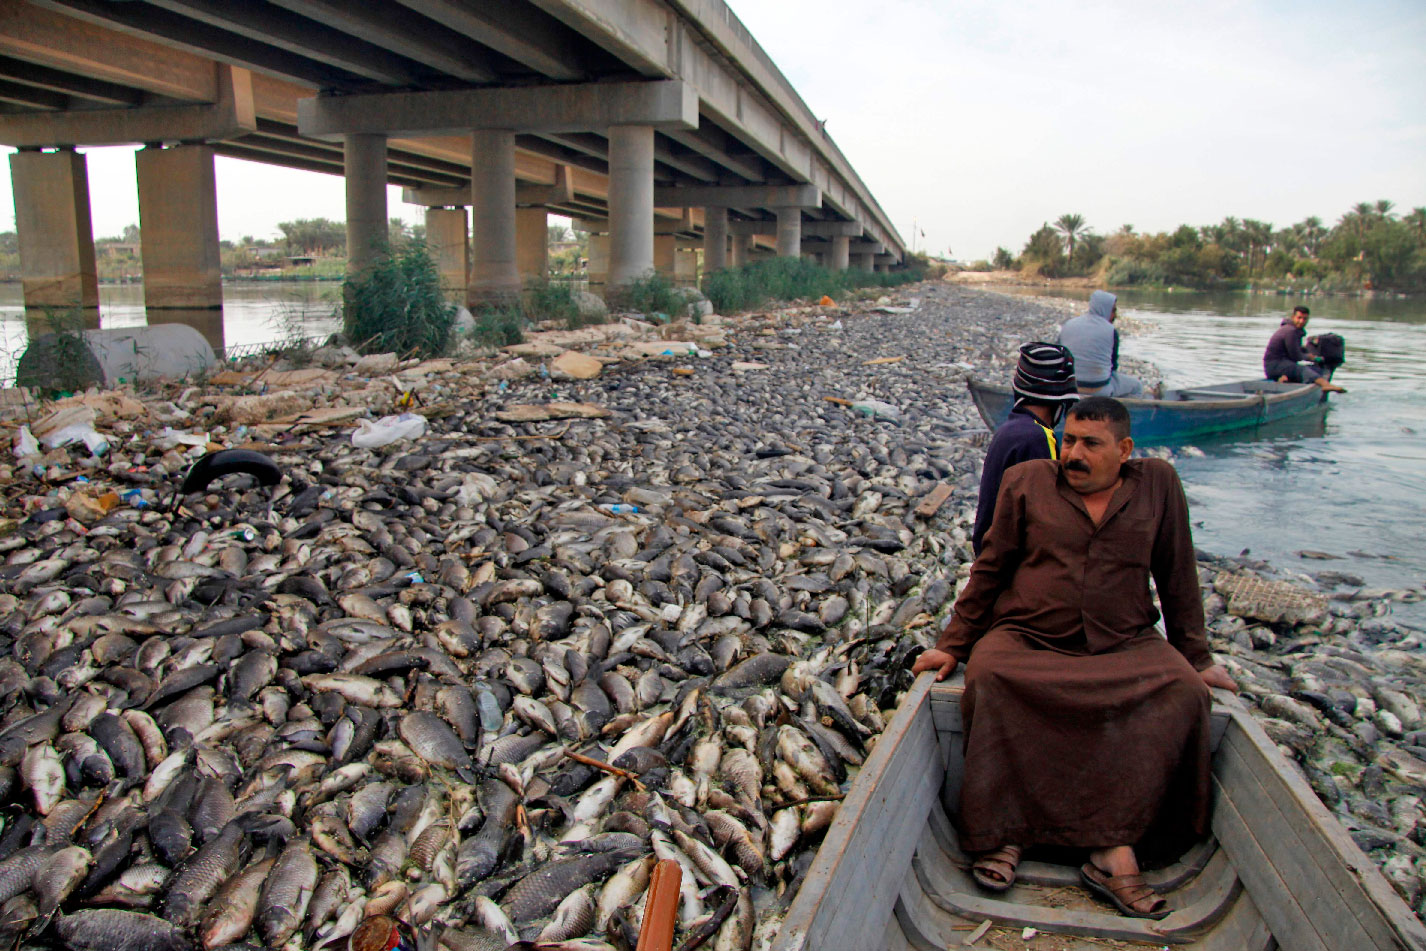 Photo taken on November 02, 2018 Iraqi men sit in boats amidst dead carp from nearby farms floating on the Euphrates river near the town of Sadat al-Hindiya, north of the central Iraqi city of Hilla.